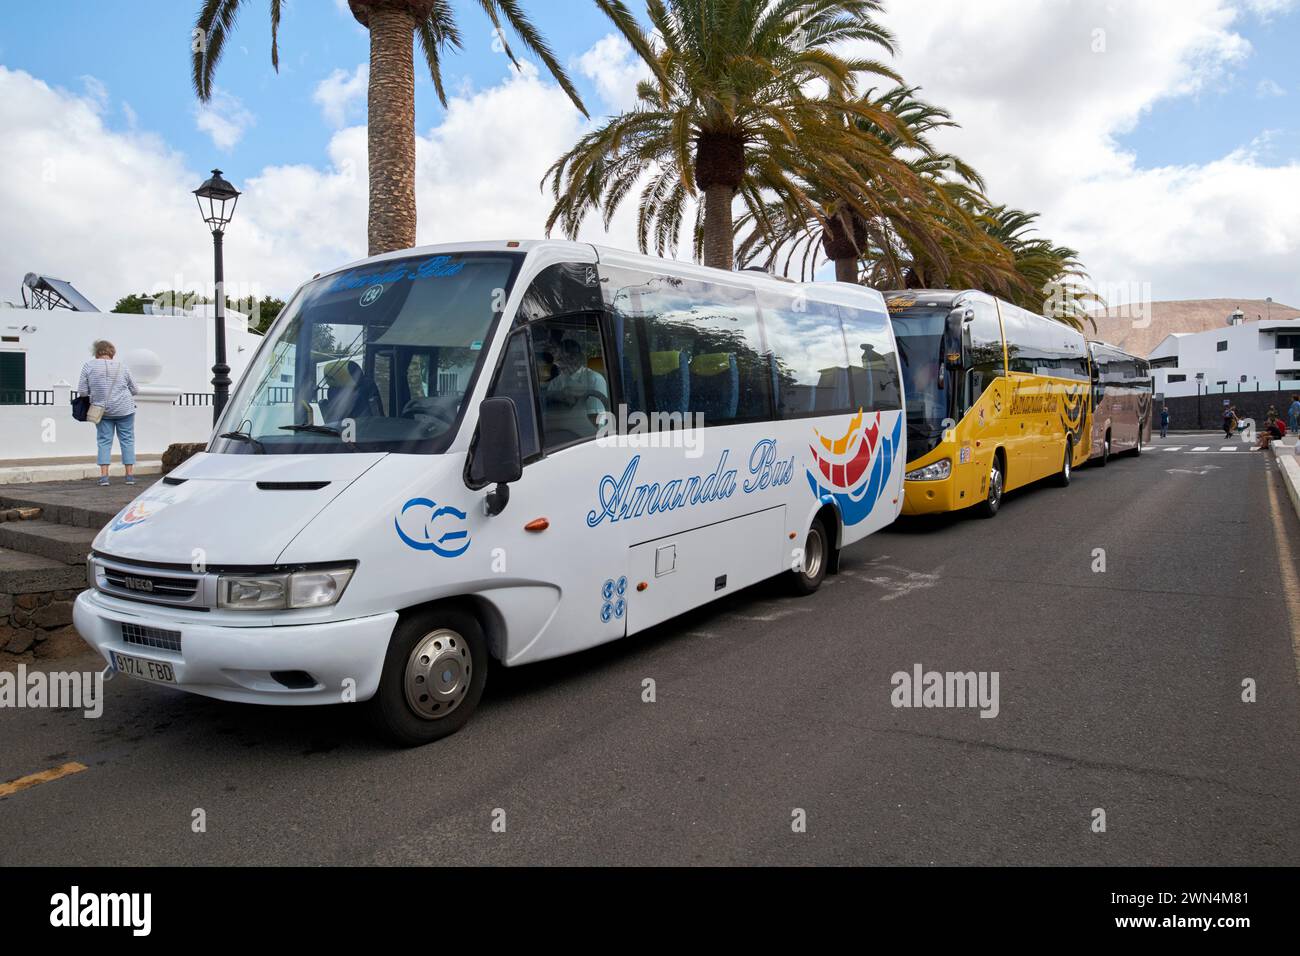 tourist guided tour coaches parked in Yaiza, Lanzarote, Canary Islands, spain Stock Photo